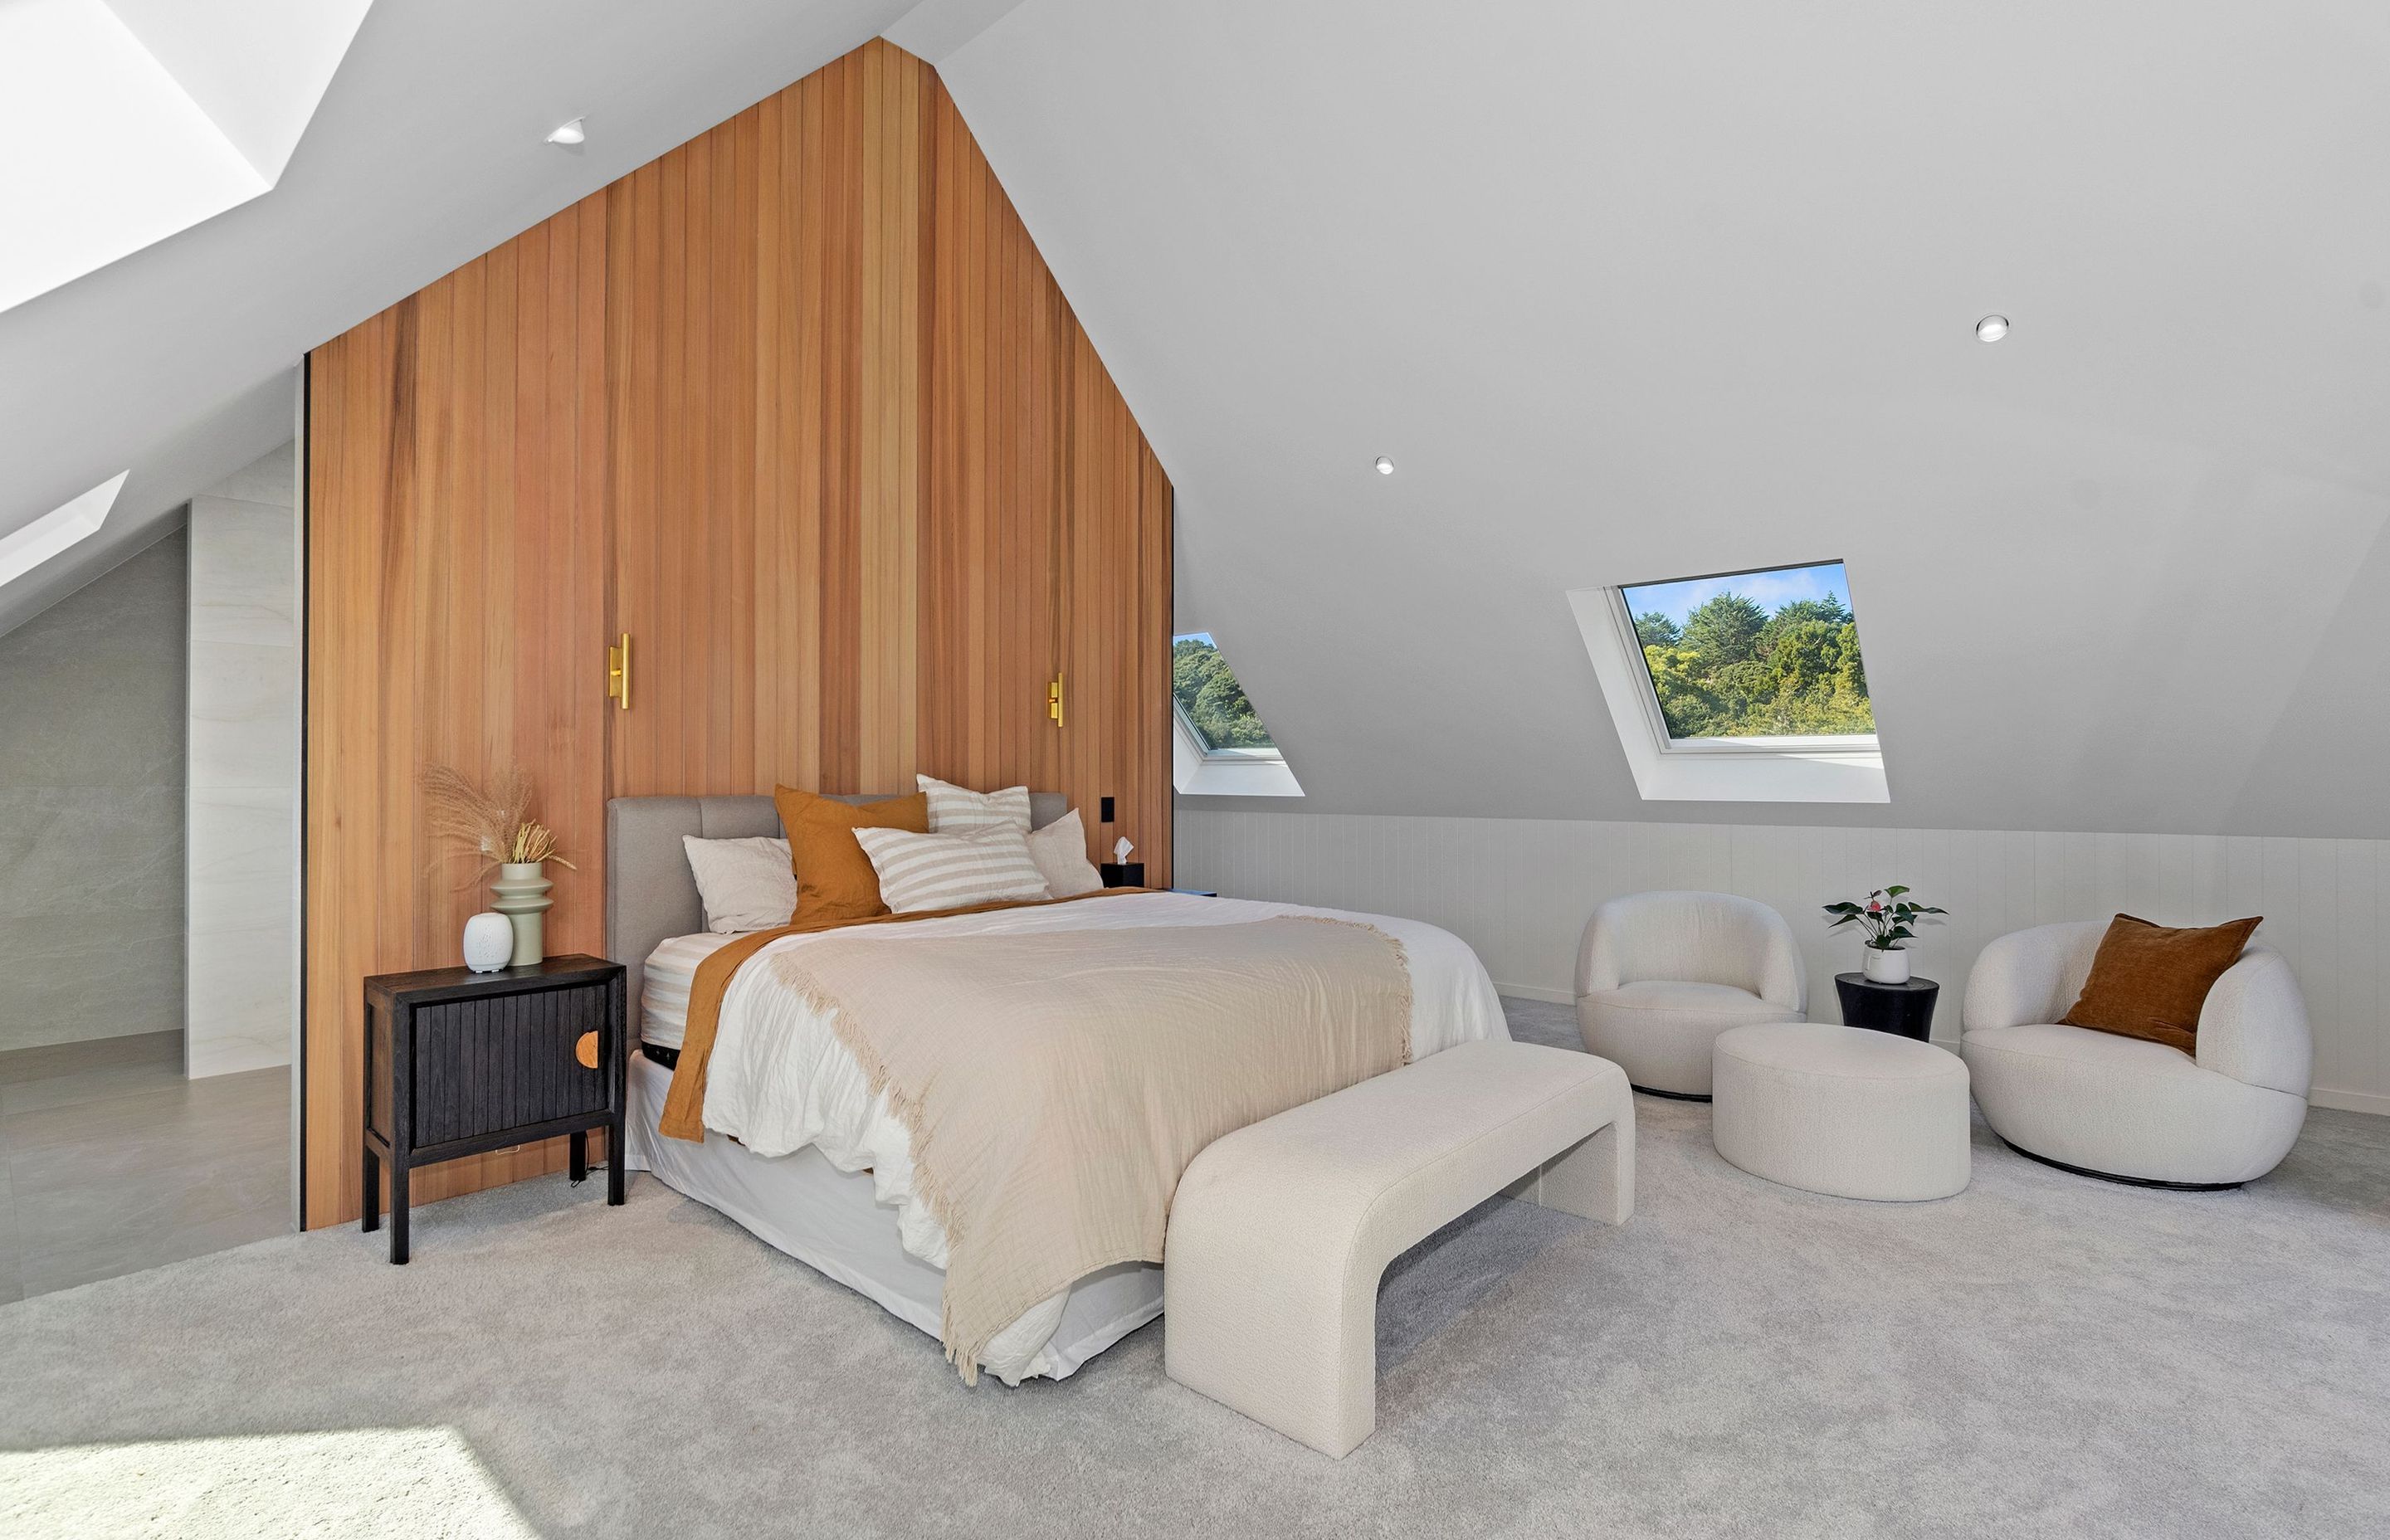 Nic says the design of the master bedroom was inspired by the vernacular of luxury hotel rooms.